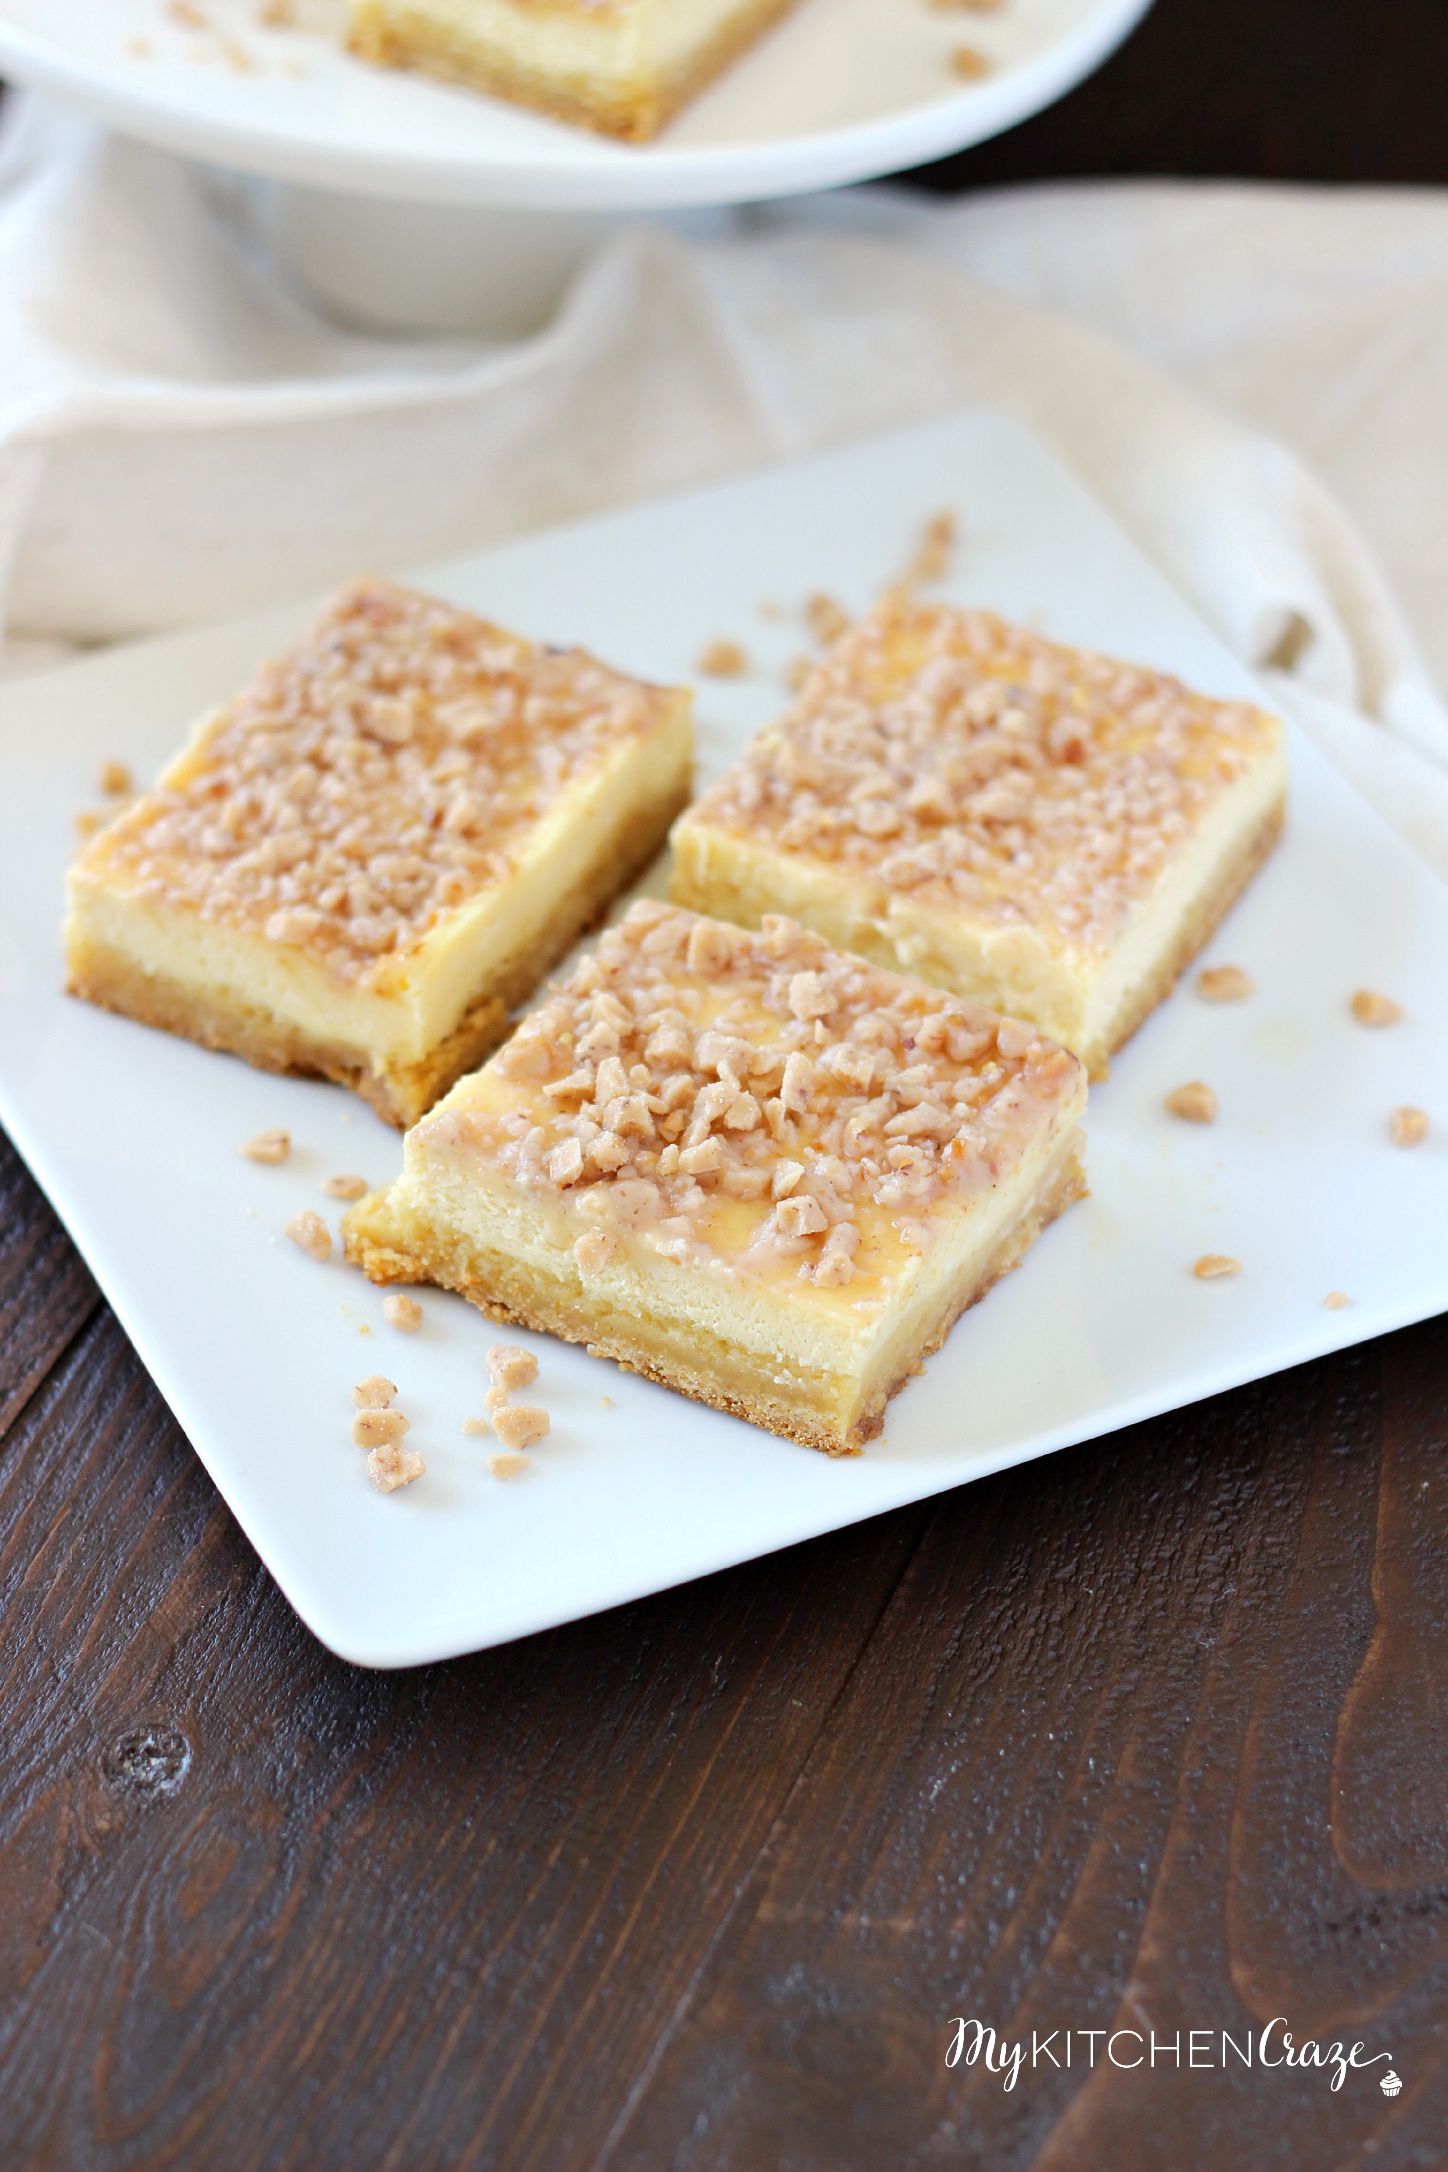 Toffee Cheesecake Bars ~ mykitchencraze ~ These bars are not only easy to throw together, but taste amazing! Sugar cookie bottom. Topped with a creamy cheesecake and sprinkled with toffee bits. What more could you ask for?